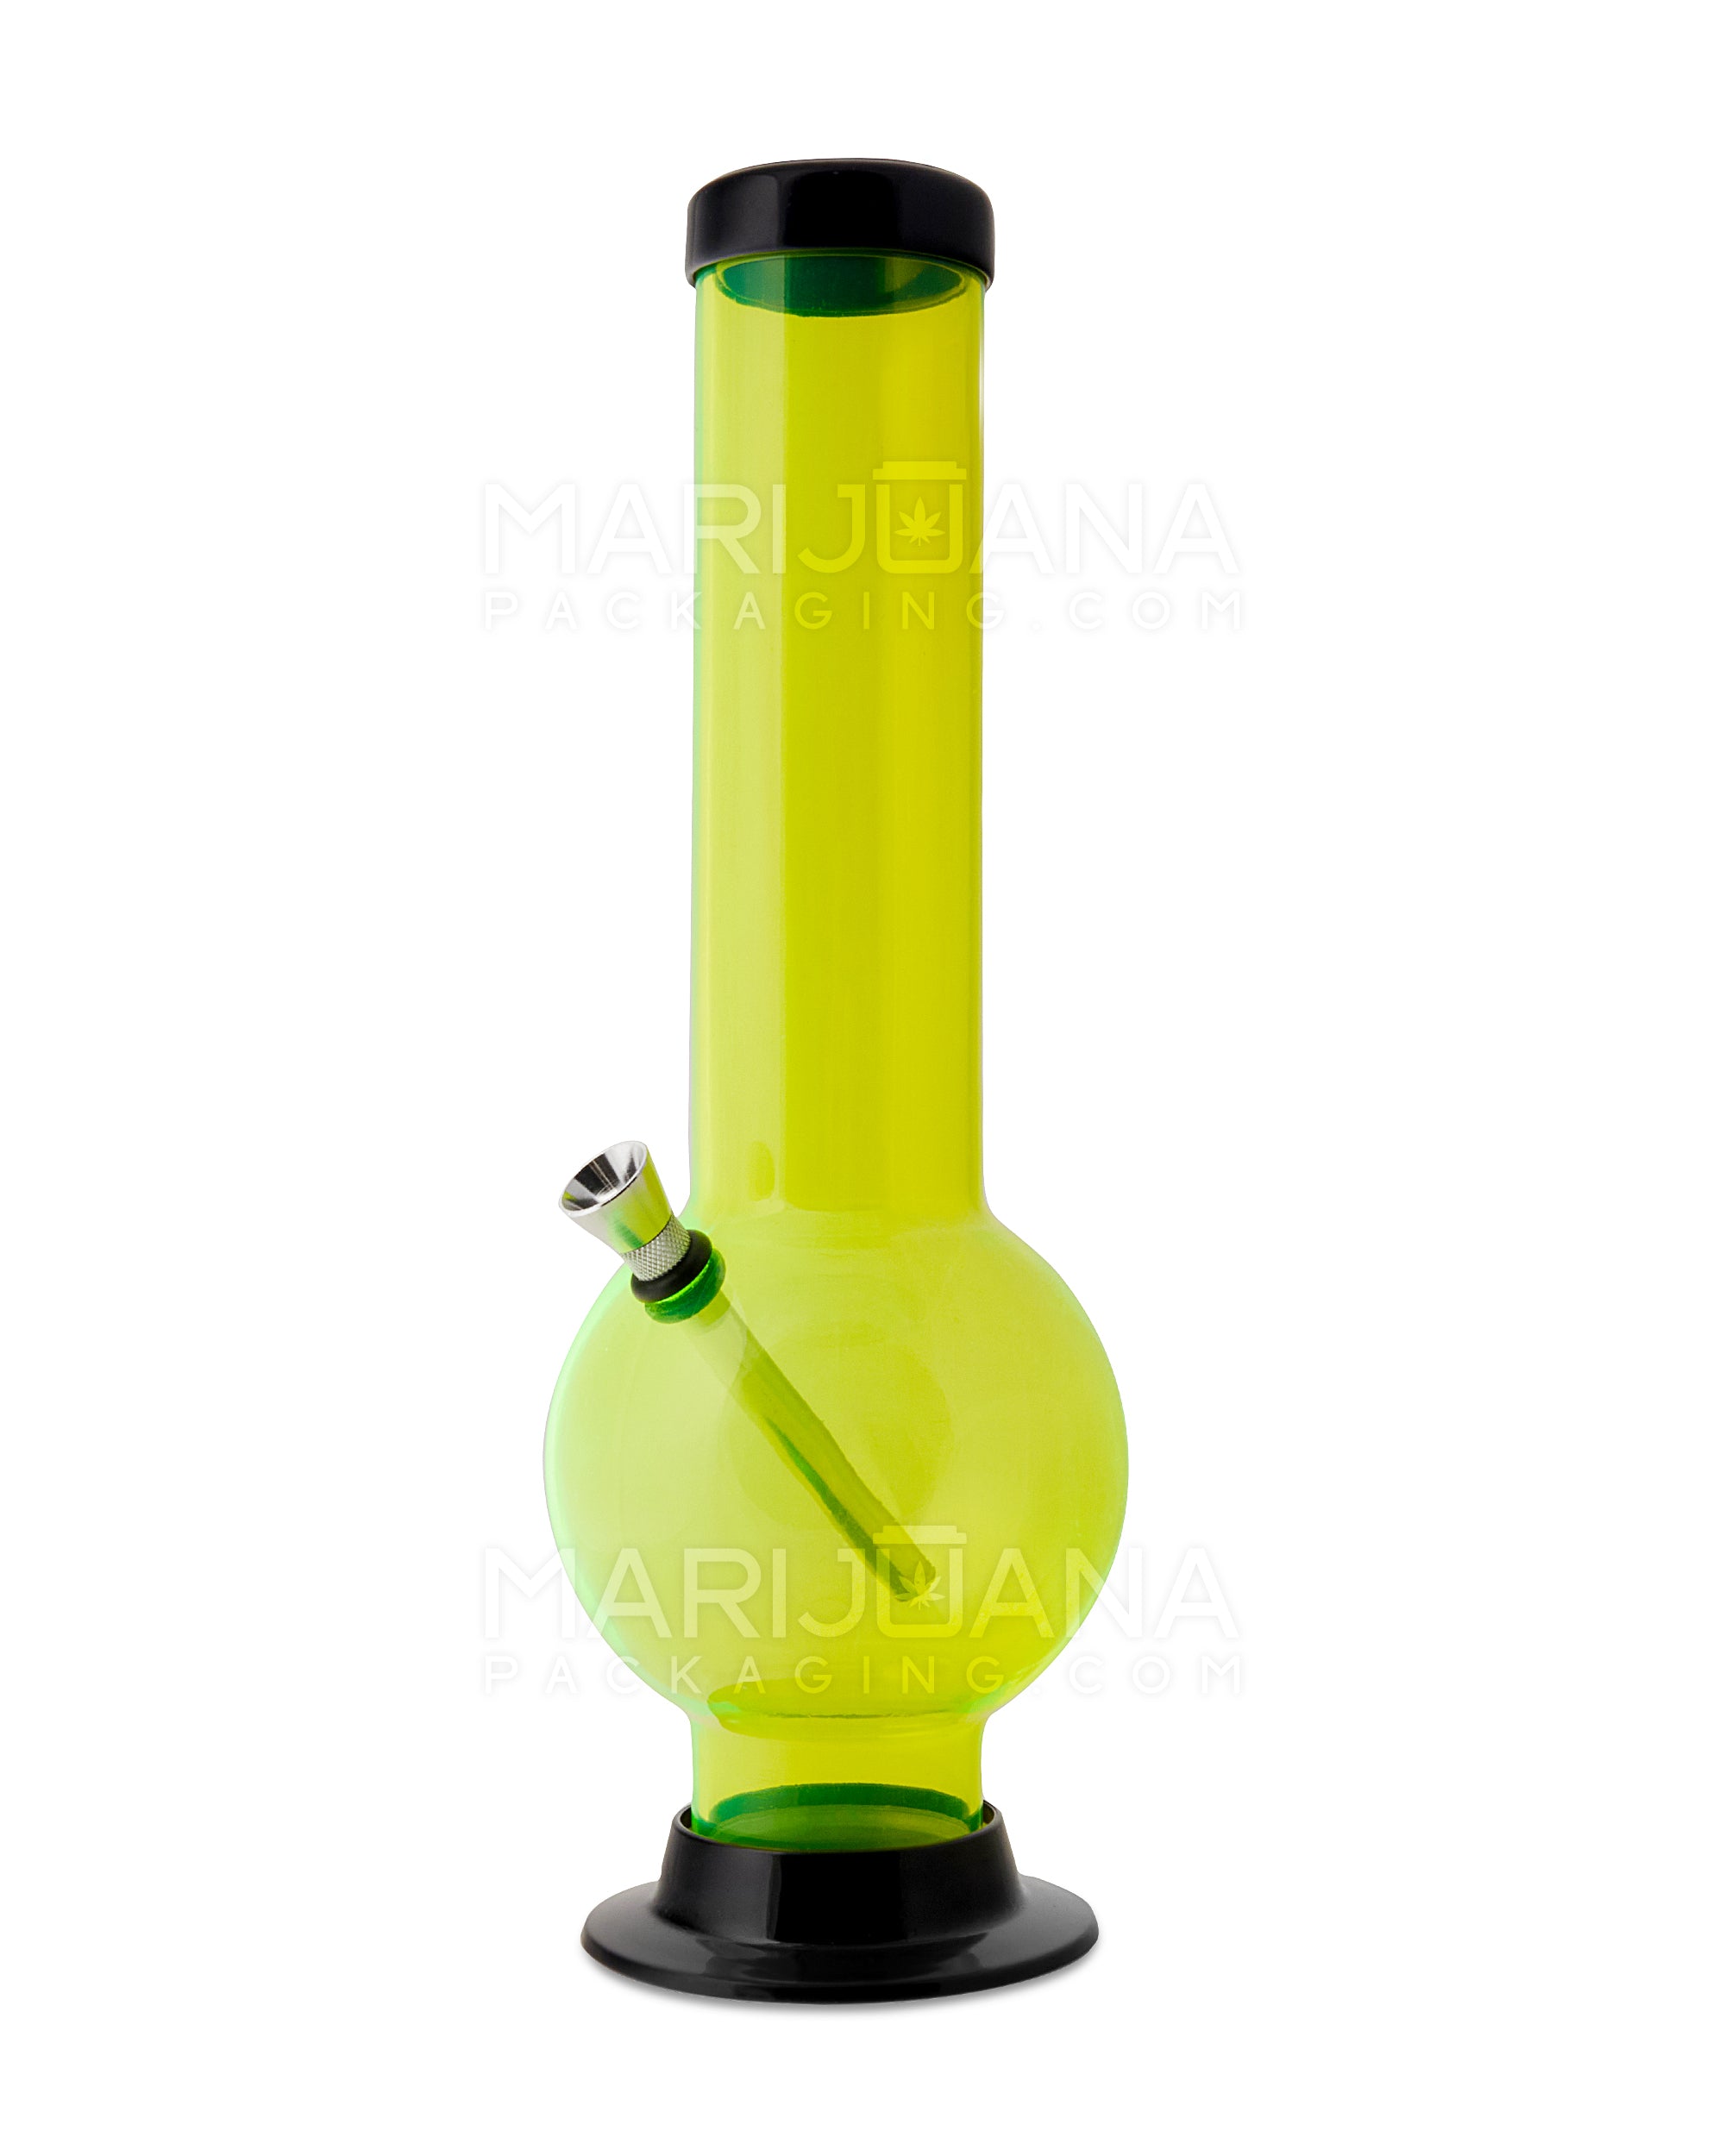 Glowing All Eyes On You Pipe - 4.5in - Everything 420